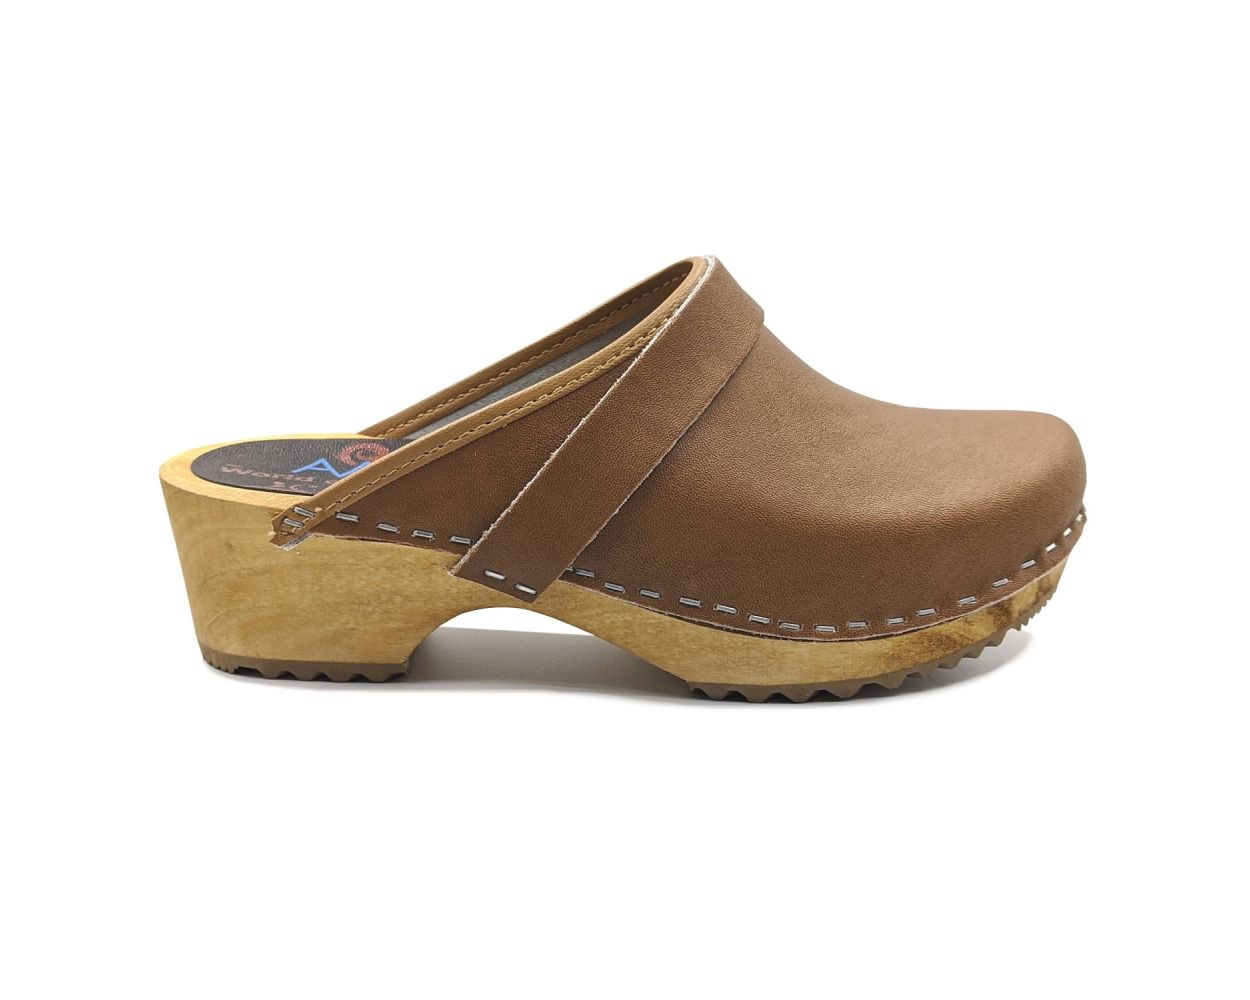 AM Toffeln 100 Clogs in Light Brown | World of Clogs